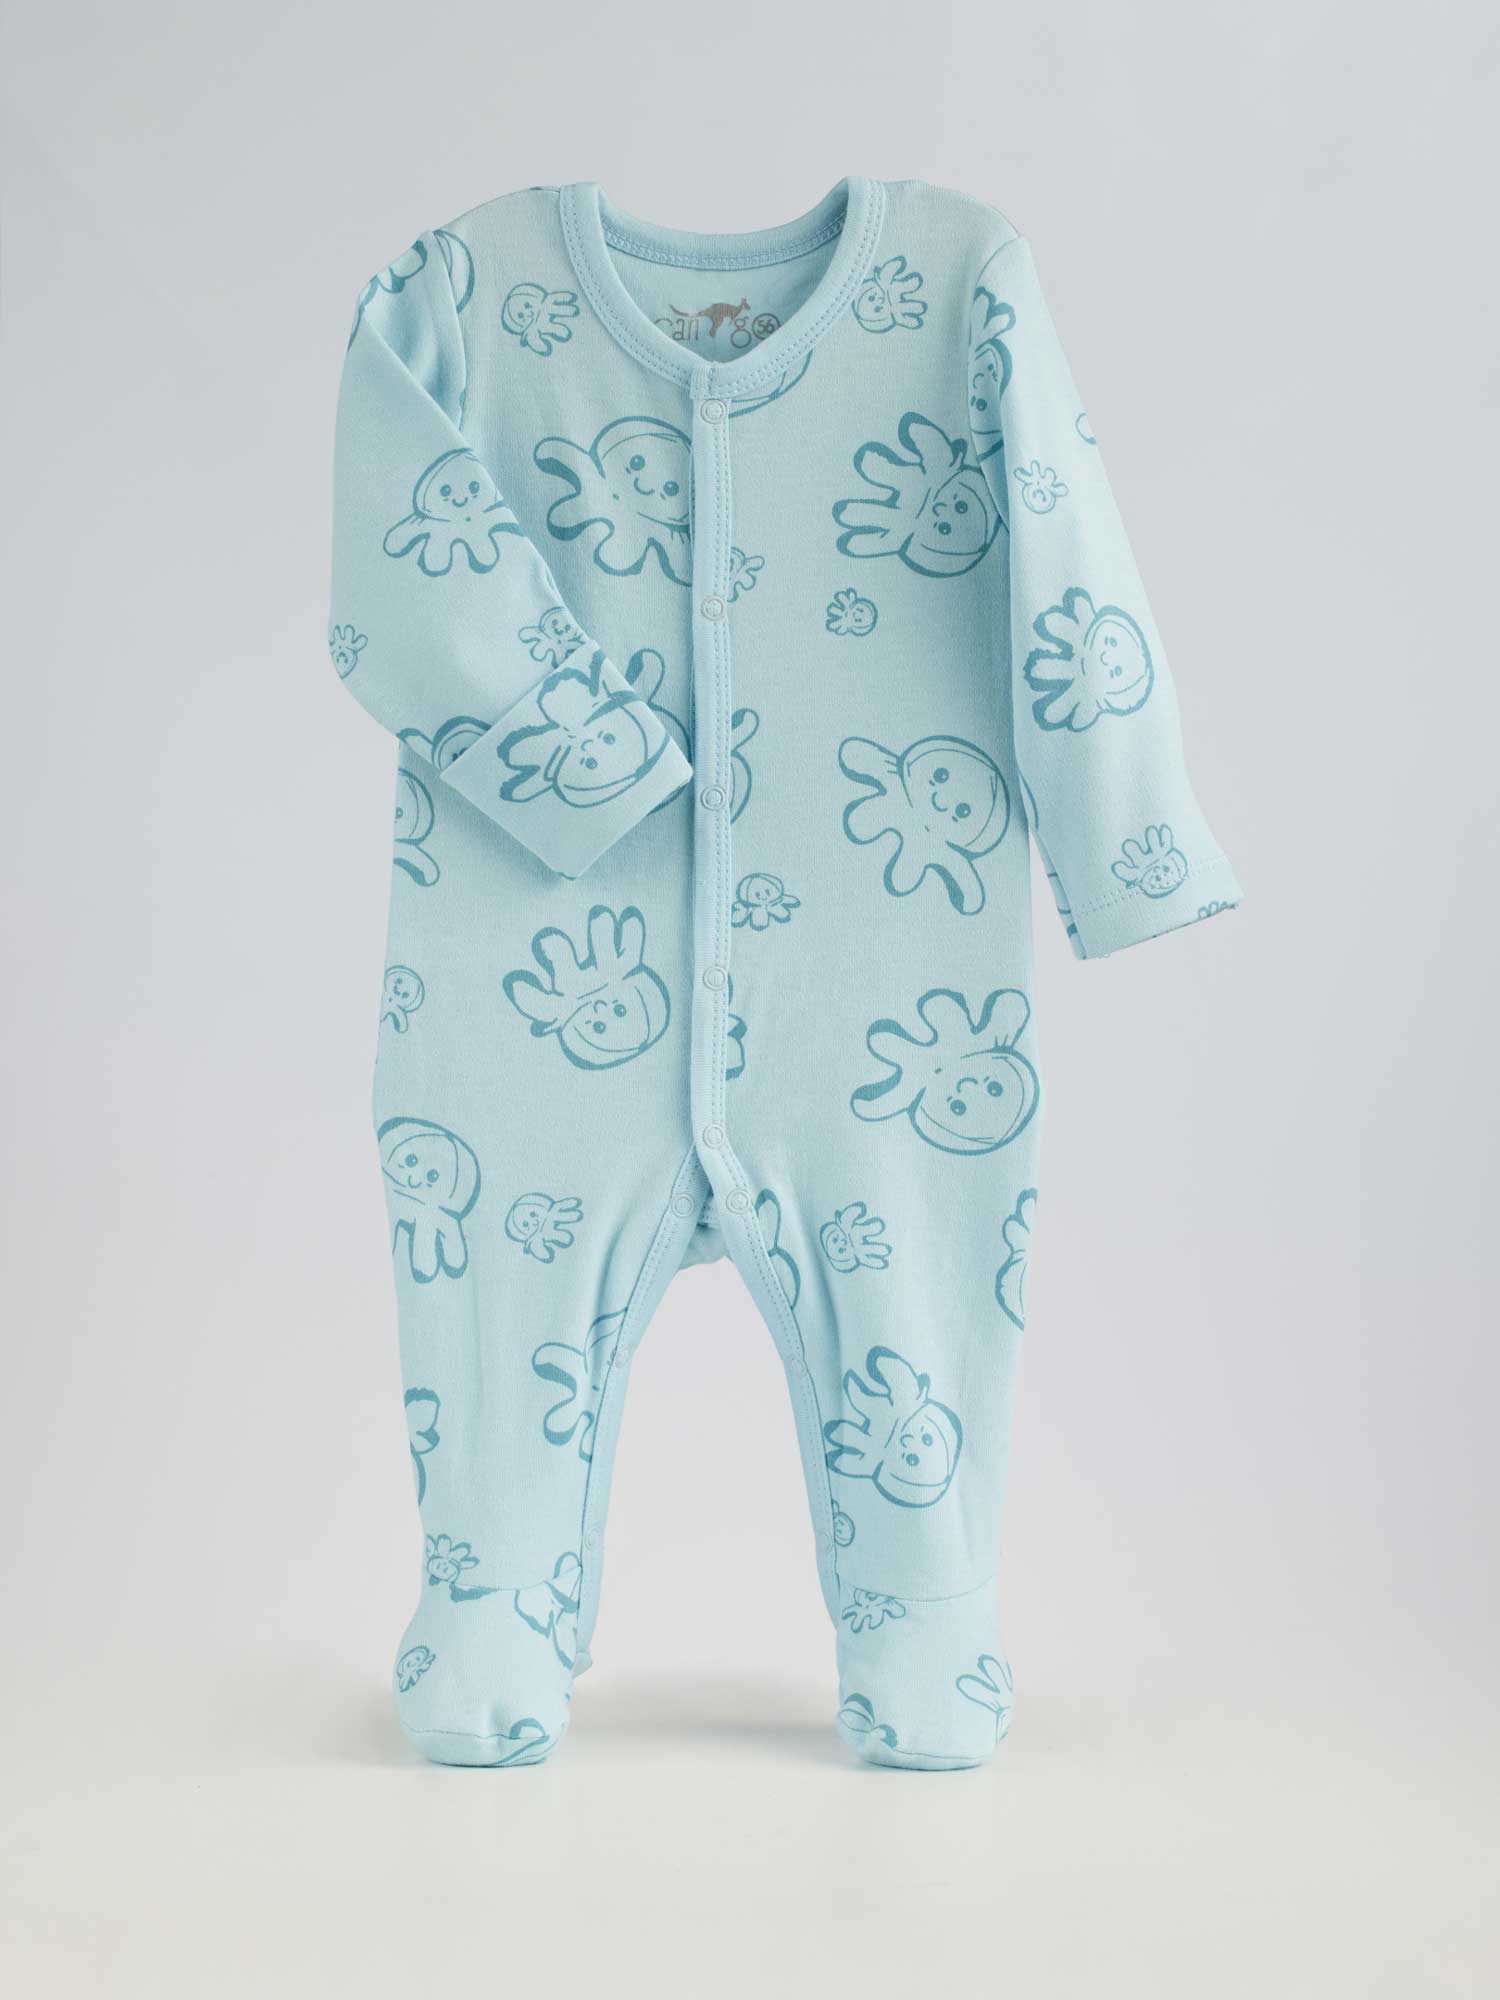 Baby Overall Sea Friends 333 is a special one-piece overall made specifically for little ones. Crafted with an attention to comfort and warmth, the overall features ultra-soft cotton material, making it thicker and warmer than most sleeping overalls. 